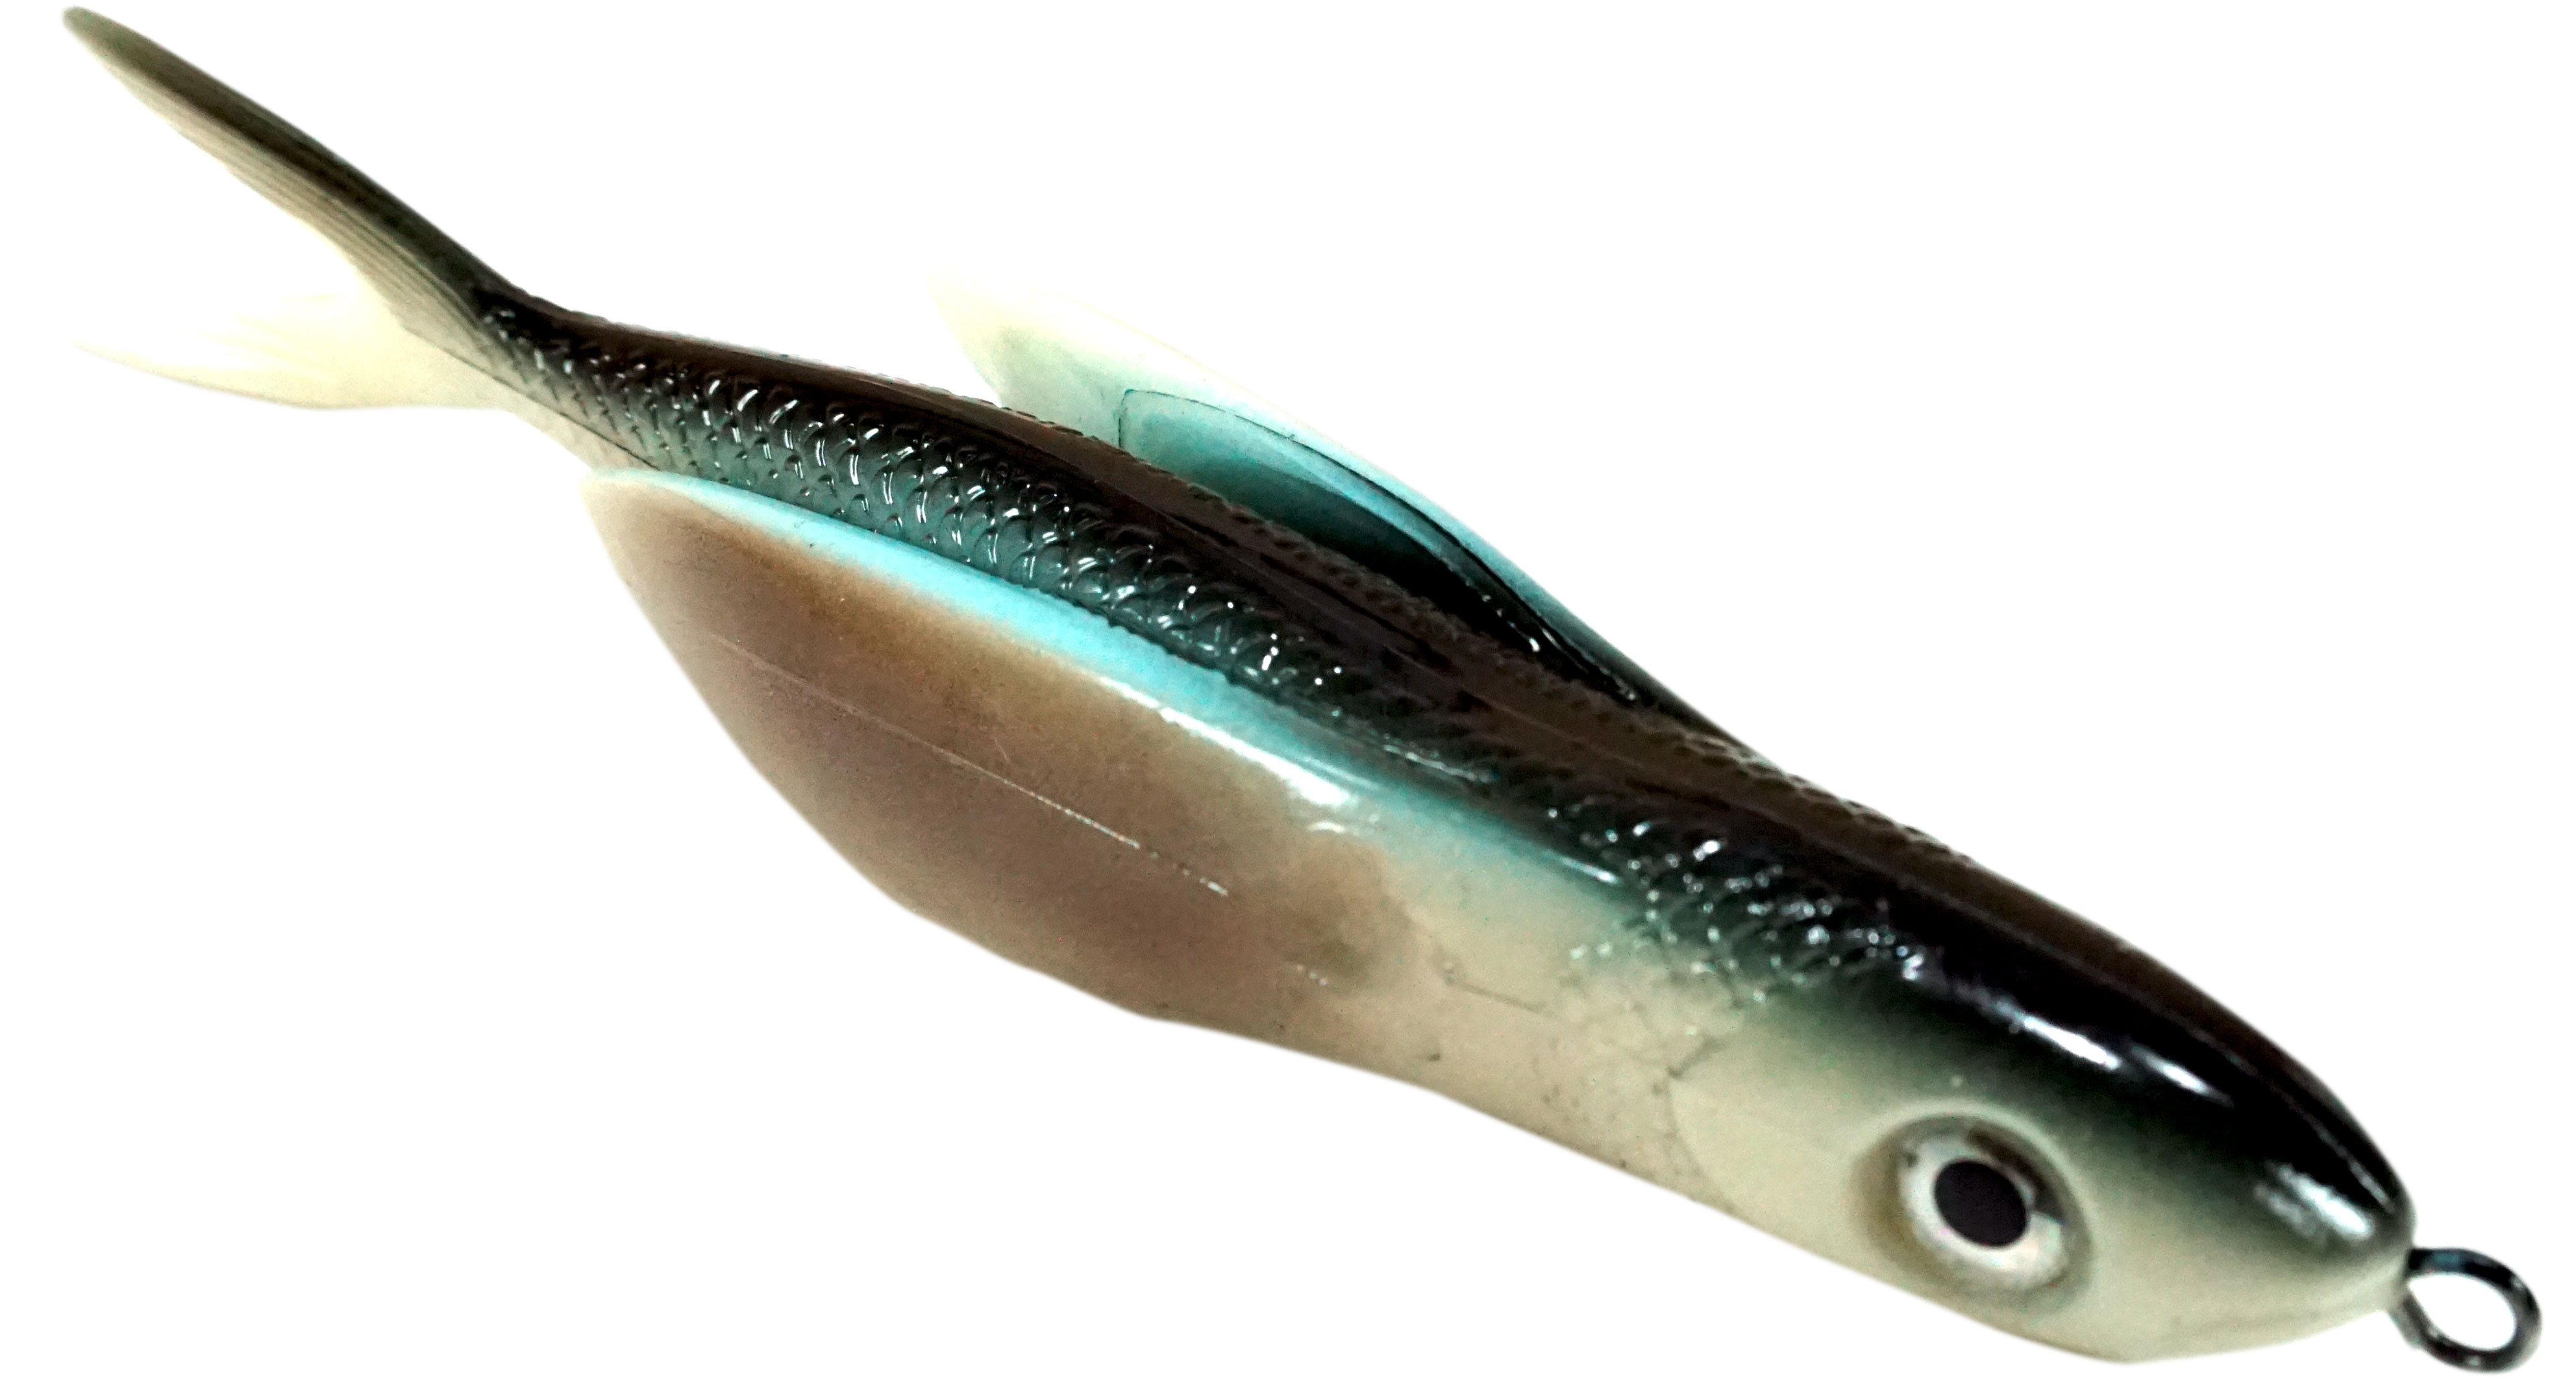 Almost Alive Lures 8.5" Soft Plastic Flying Fish with Swept Back Wing Bait Natural Color with Spring